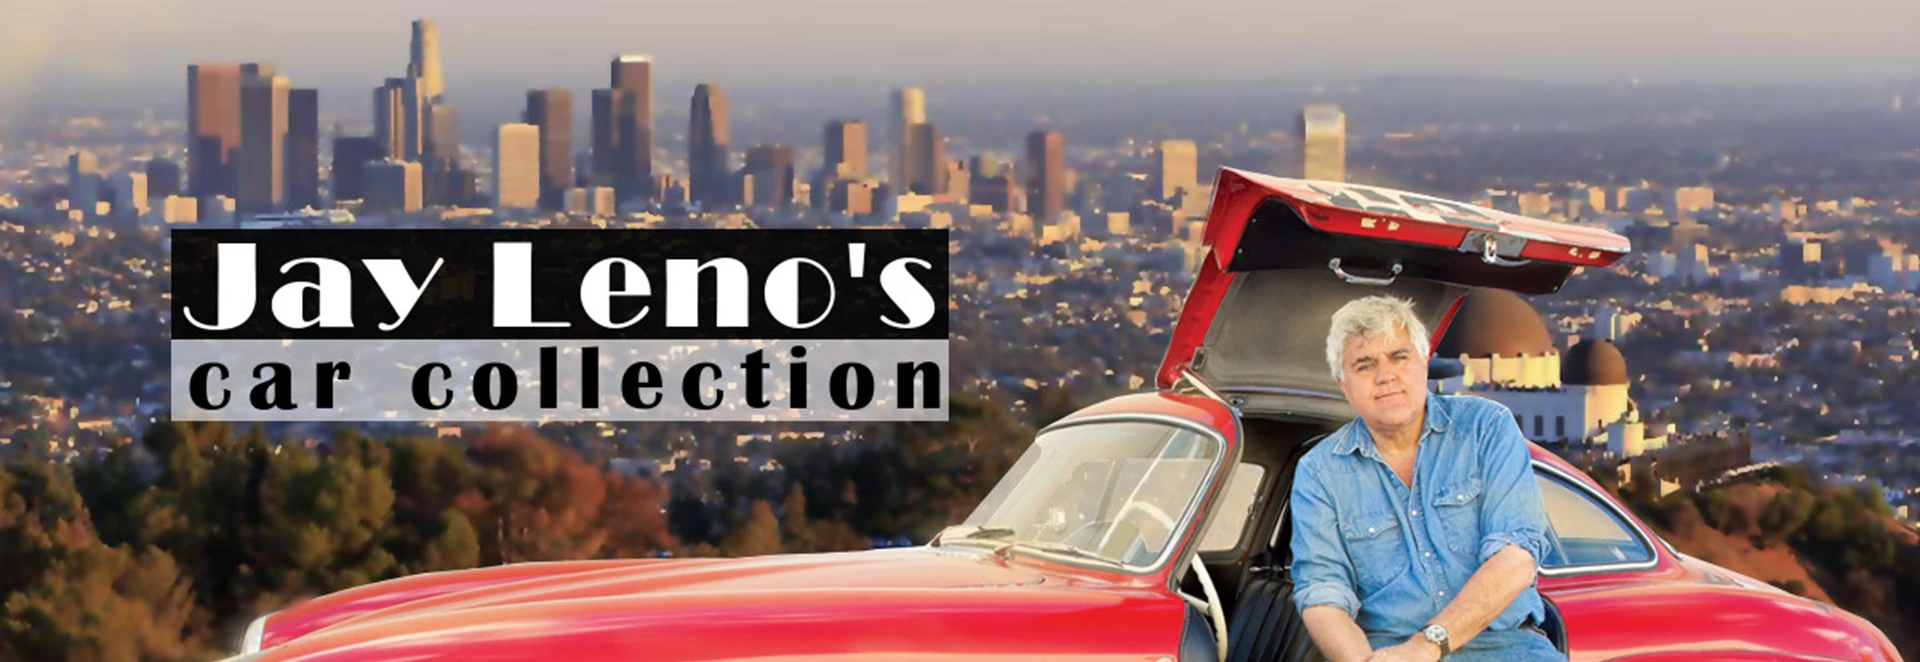 Jay Leno’s Car Collection 